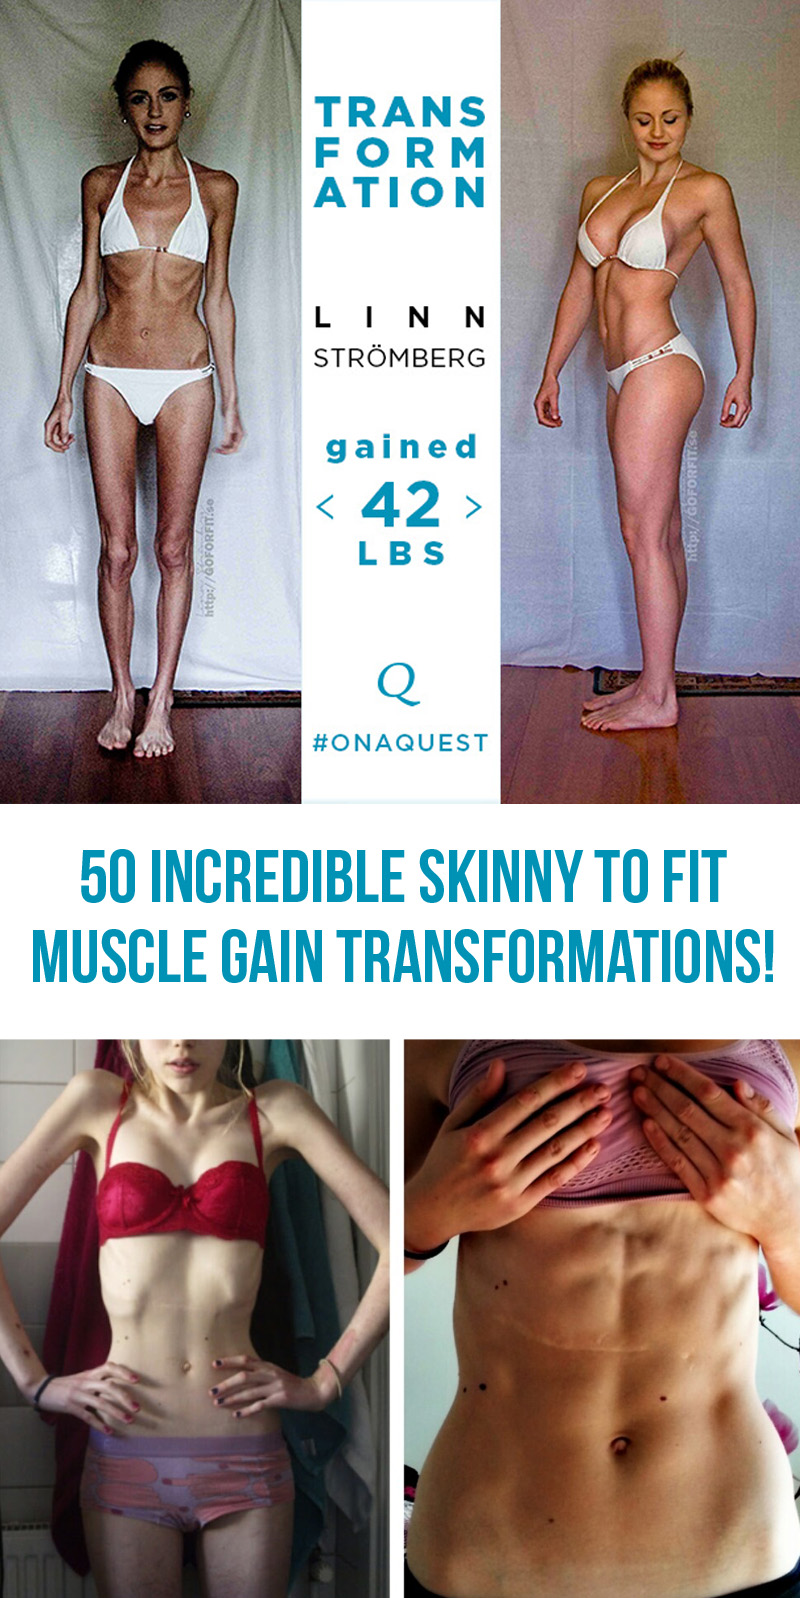 The Muscle-Building Site for Thin Women — Bony to Bombshell